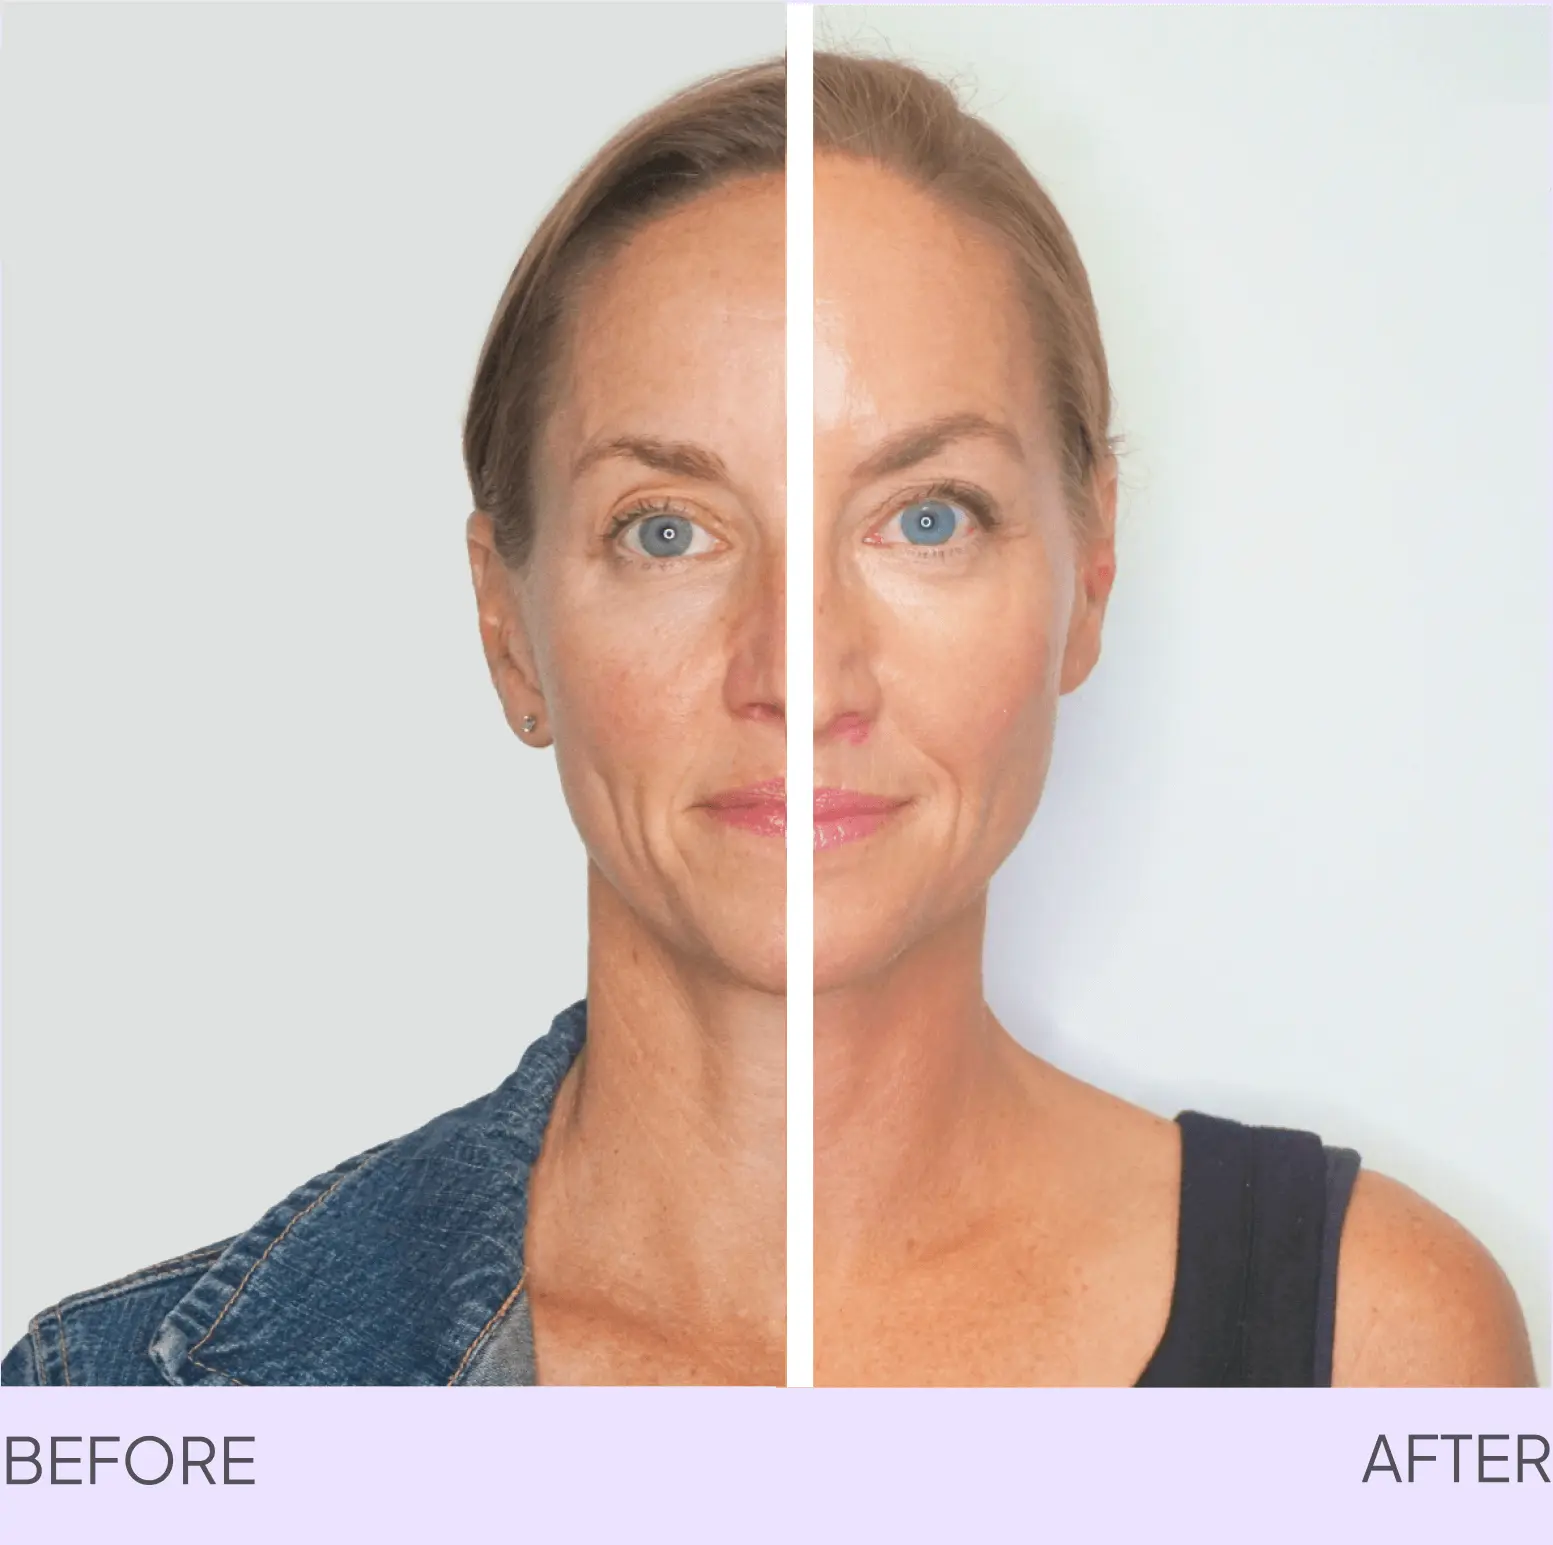 before and after image of a beautiful woman with refreshed and lifted skin after using microcurrent